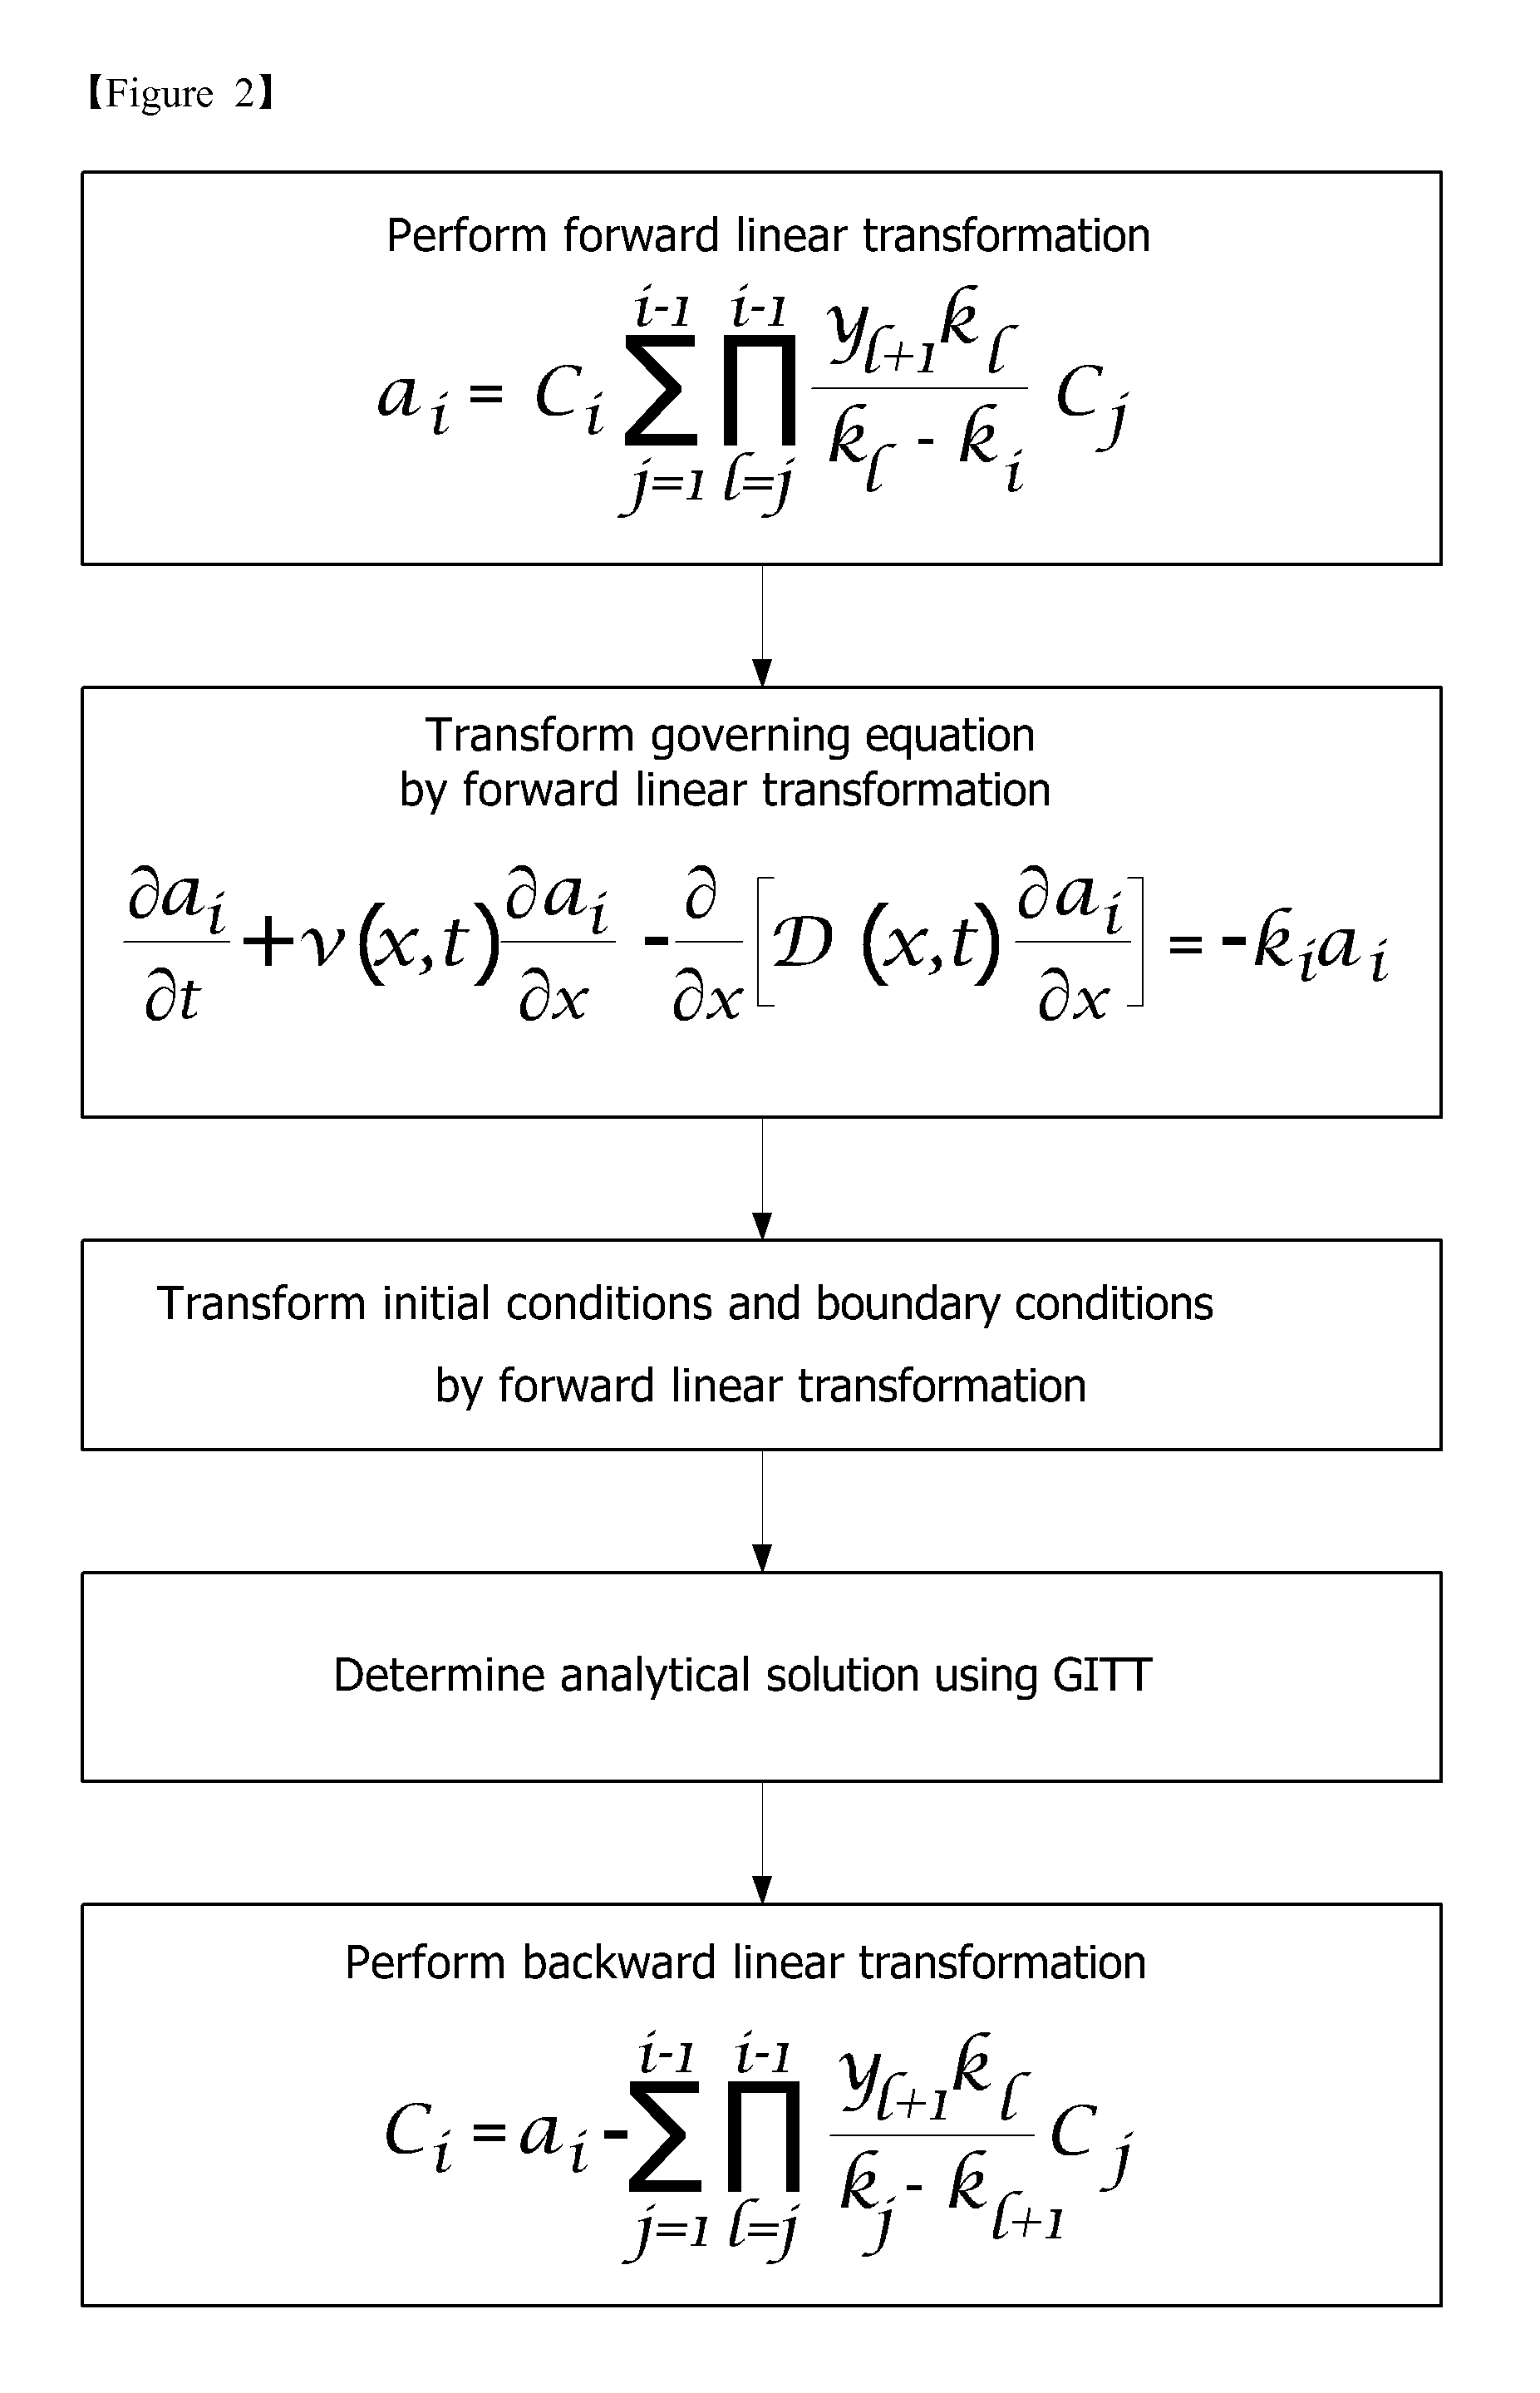 Method of seeking semianalytical solutions to multispecies transport equations coupled with sequential first-order reactions